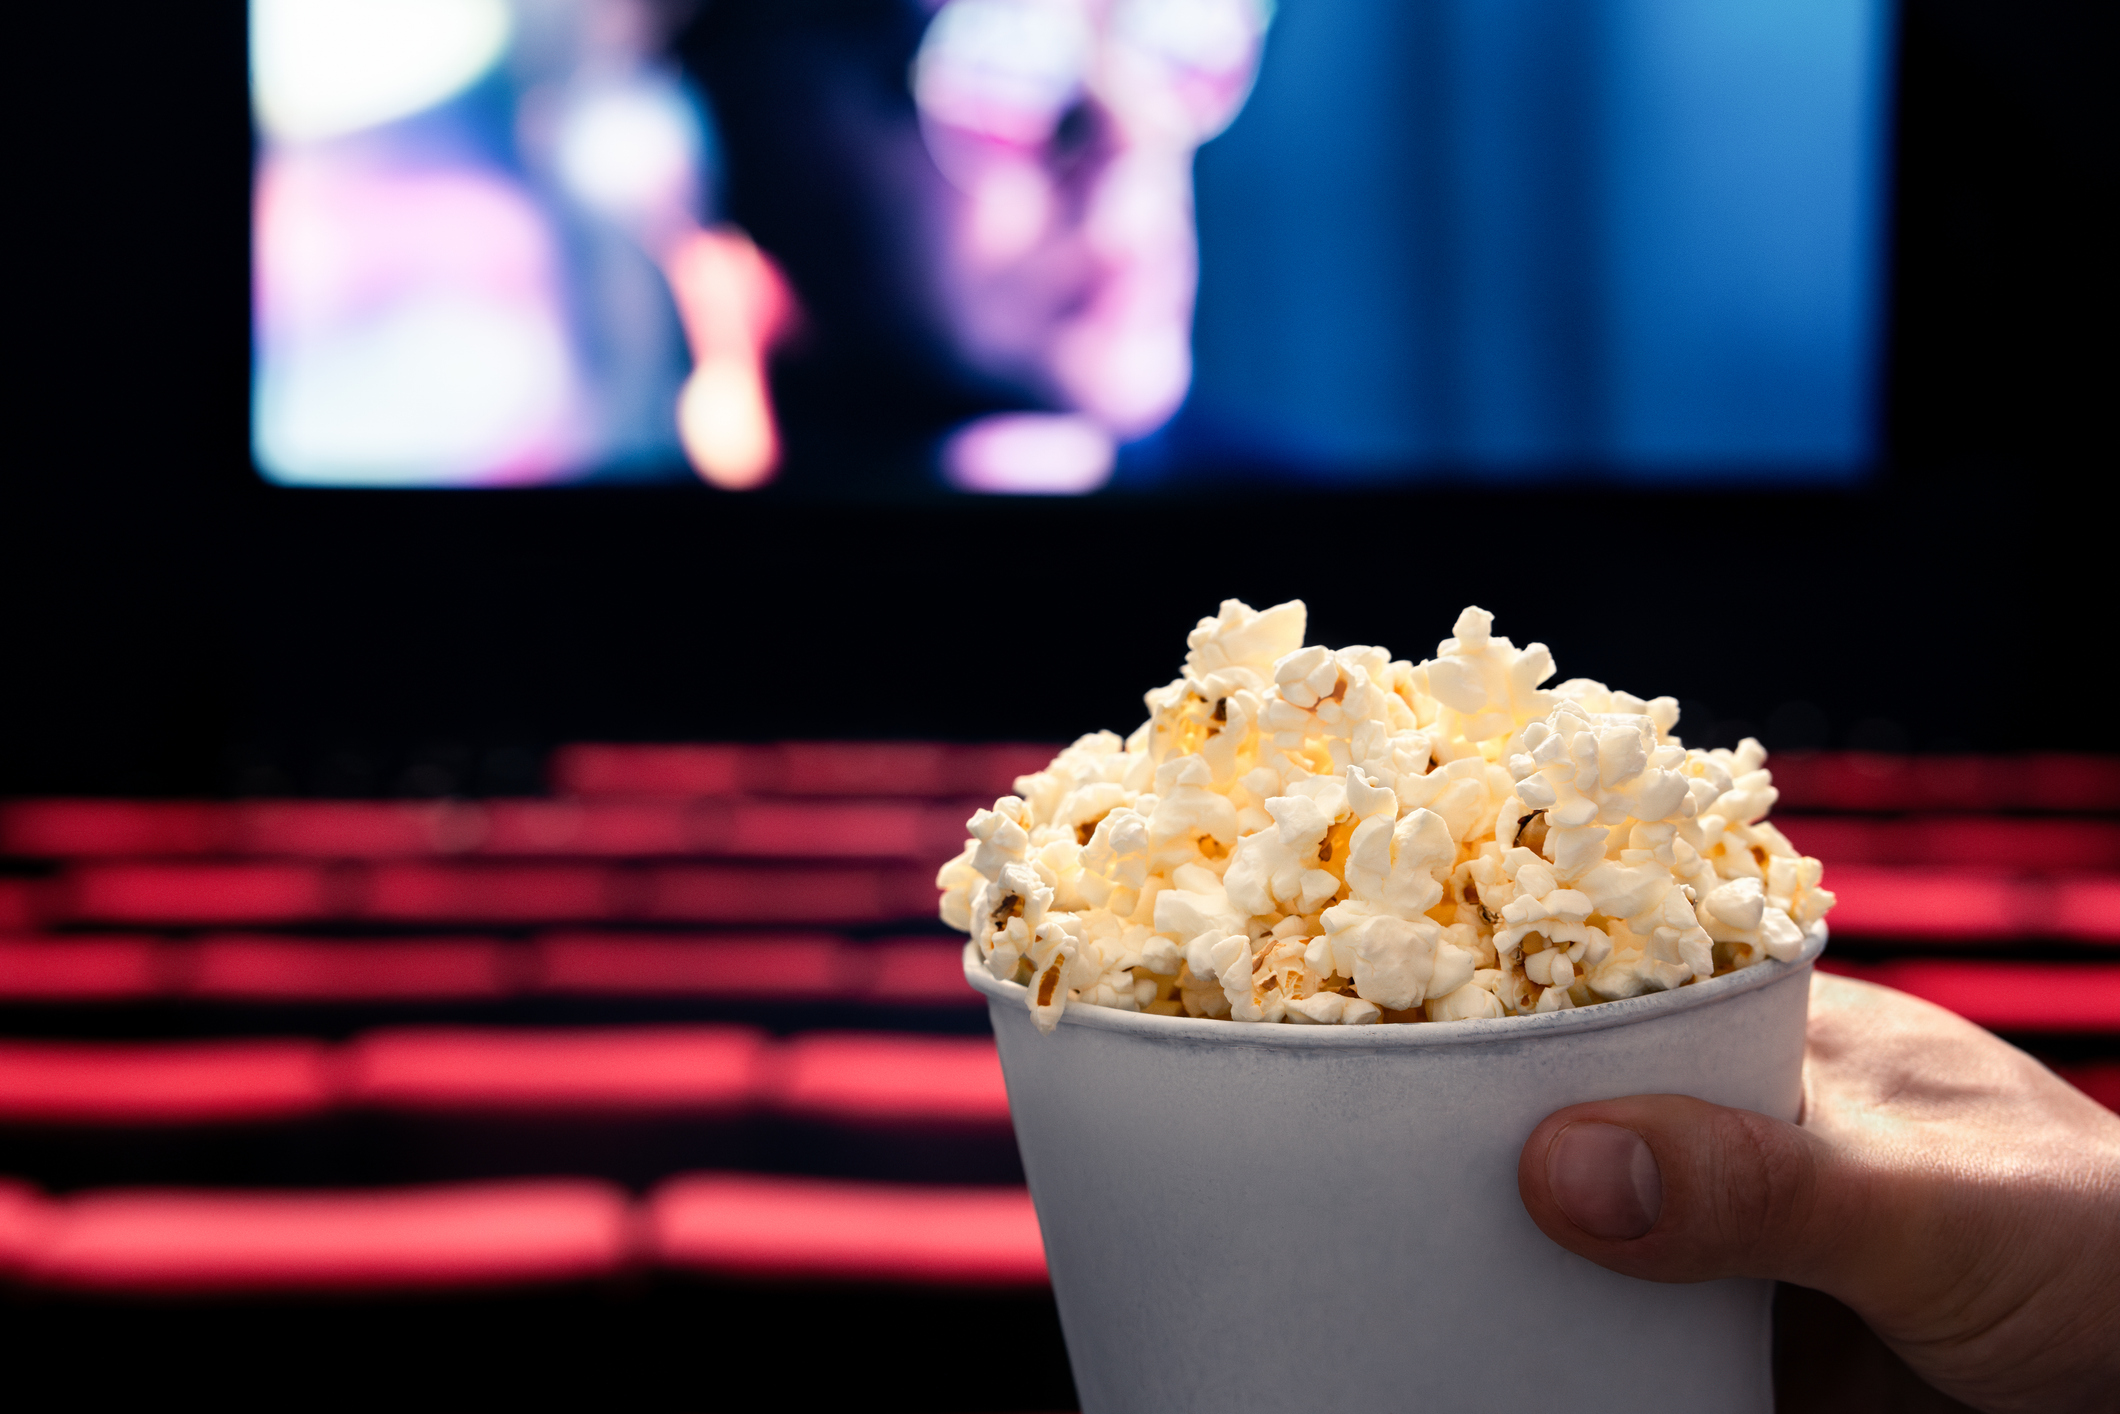 Movies and popcorn. Man holding pop corn box at cinema. Action, thriller or scifi entertainment on screen. Red seats in dark theater. Salty snack in bucket. Spectator pov.